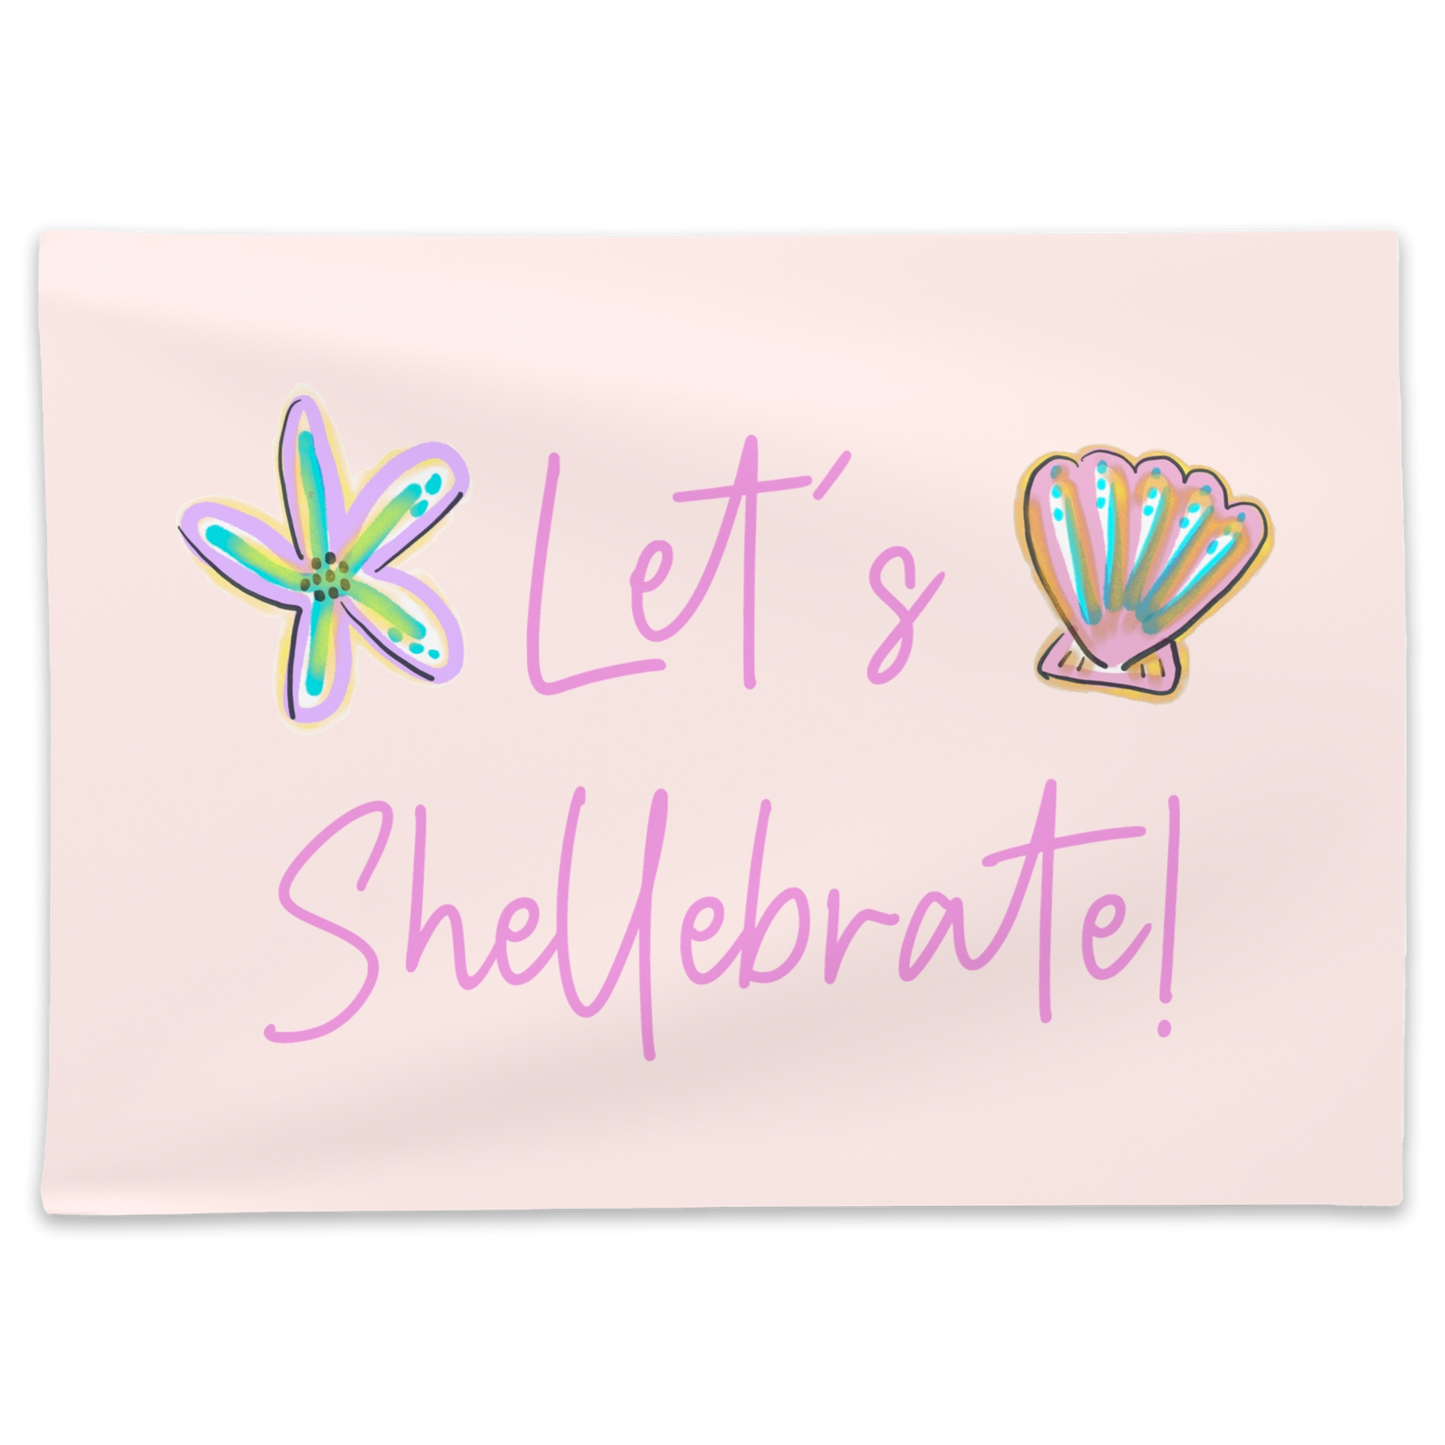 Magical Shell-e-bration Party Banner